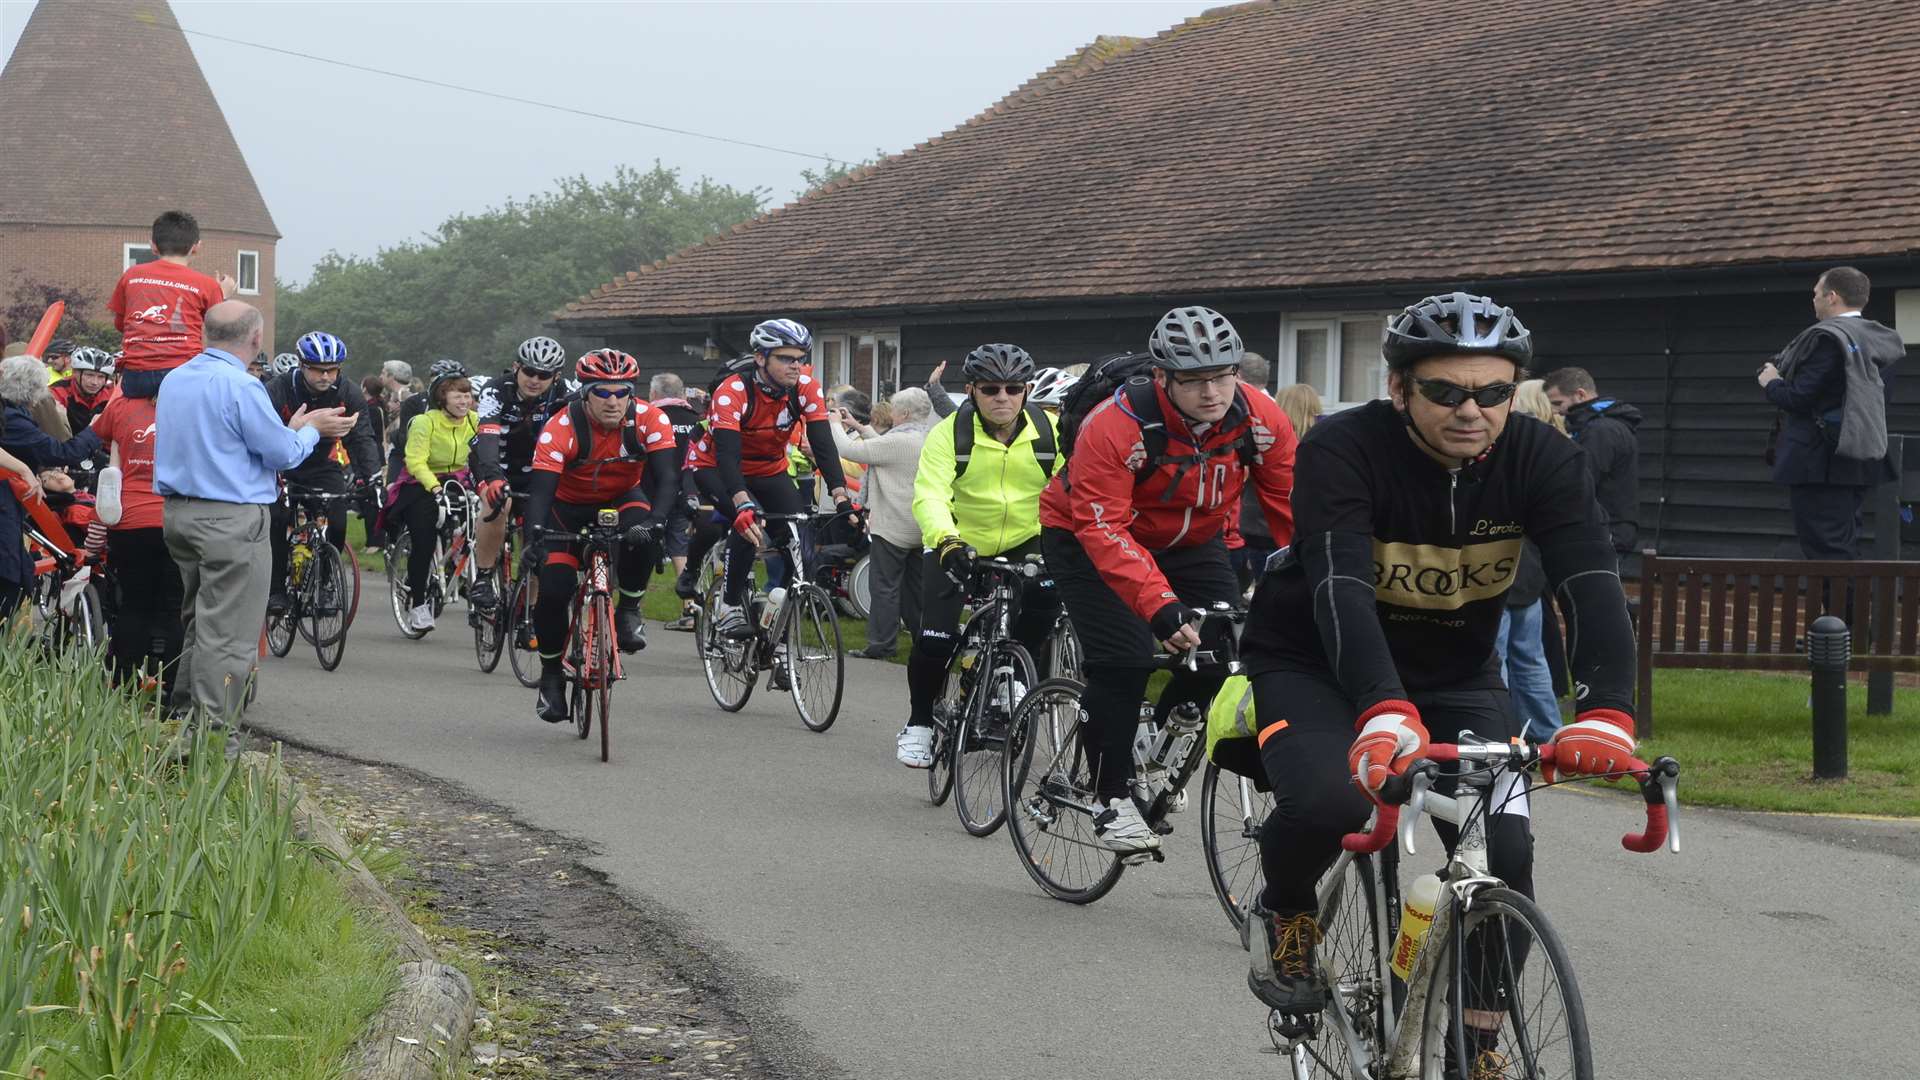 Cyclists will set off from the Bobbing site like participants did for the Sittingbourne to Paris bike ride last year